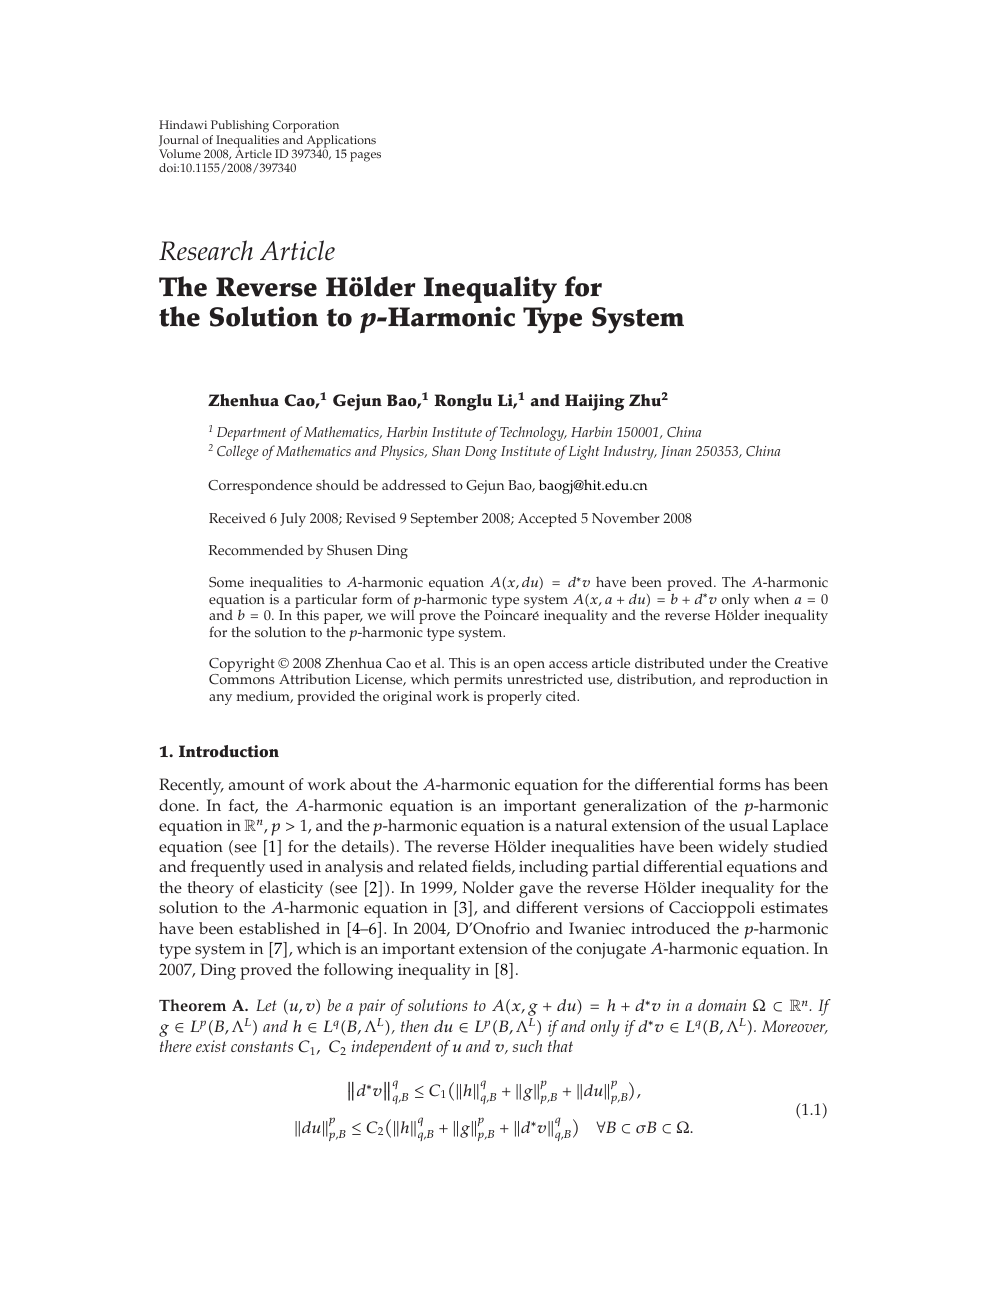 The Reverse Holder Inequality For The Solution To P Harmonic Type System Topic Of Research Paper In Mathematics Download Scholarly Article Pdf And Read For Free On Cyberleninka Open Science Hub